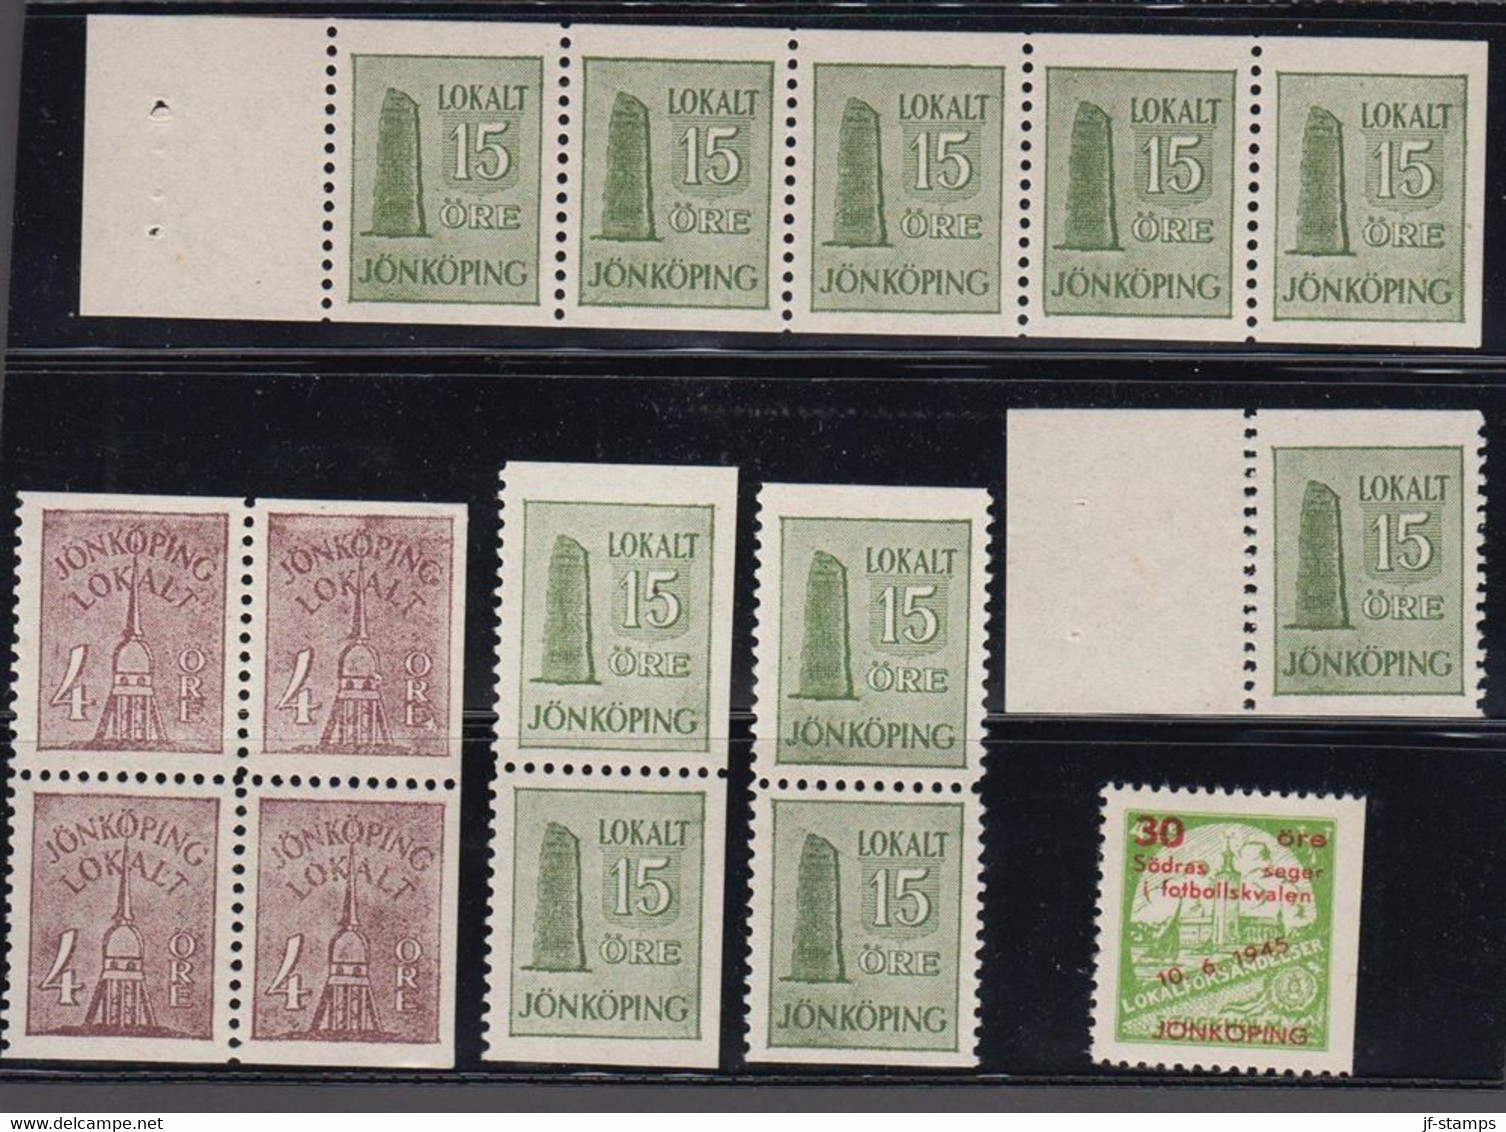 1945. SVERIGE. JÖNKÖPING LOKALT. Selection Of 15 Seals Both Hinged And Never Hinged. Including The Overpri... - JF520096 - Local Post Stamps